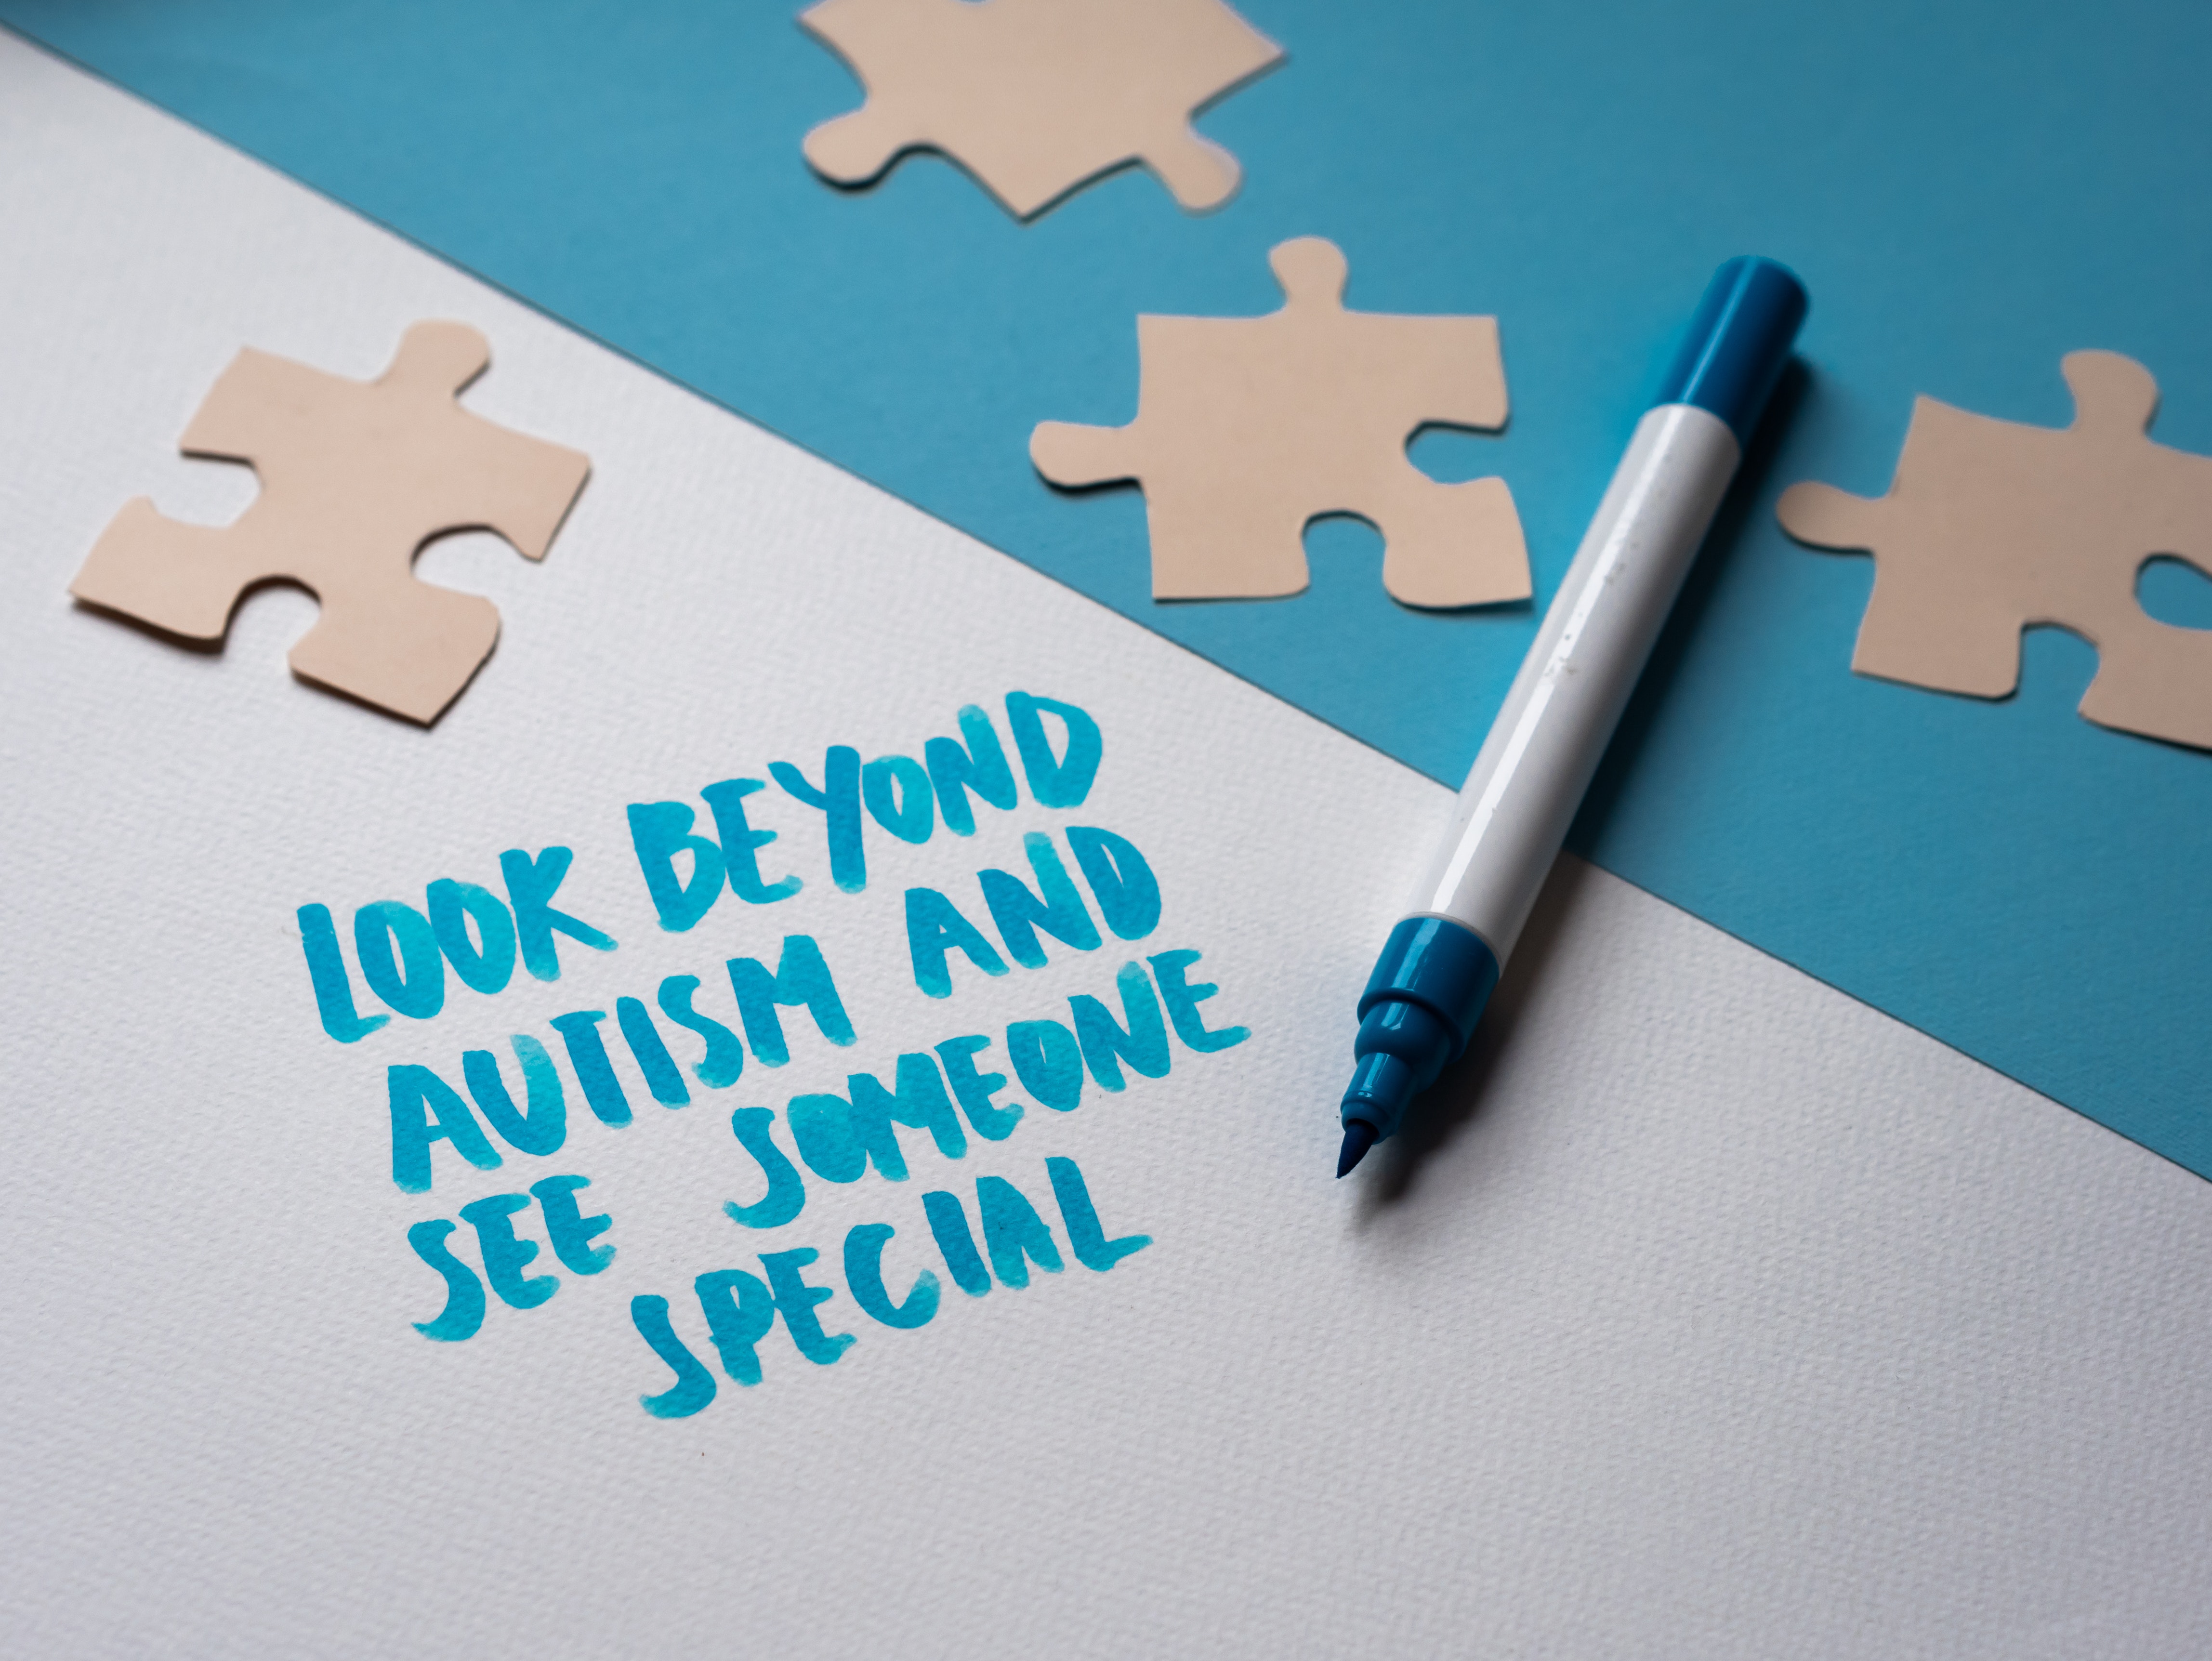 A decorative image with the text "look beyond autism and see someone special"